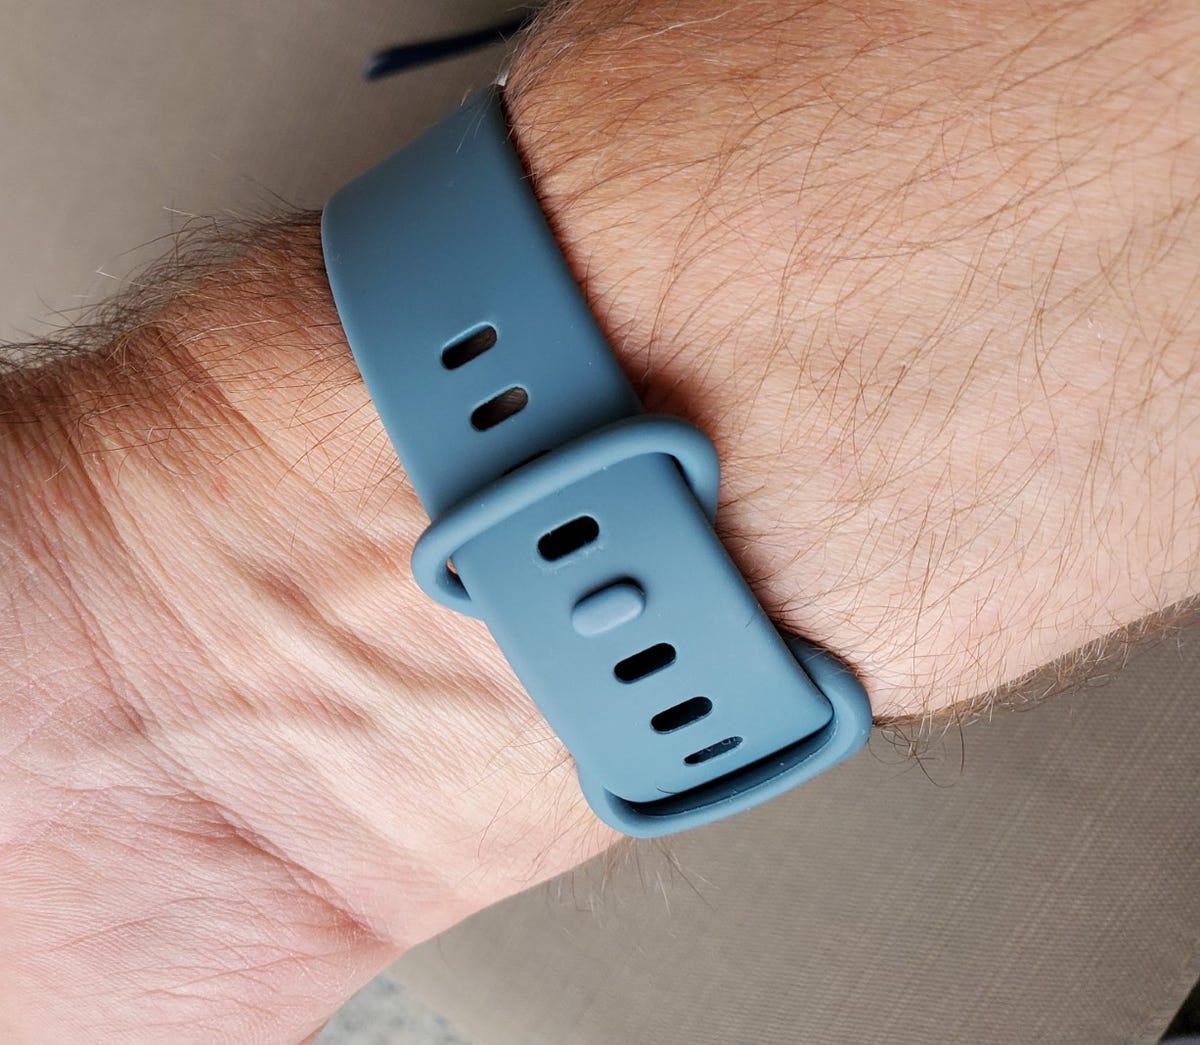 fitbit-charge-5-7.jpg